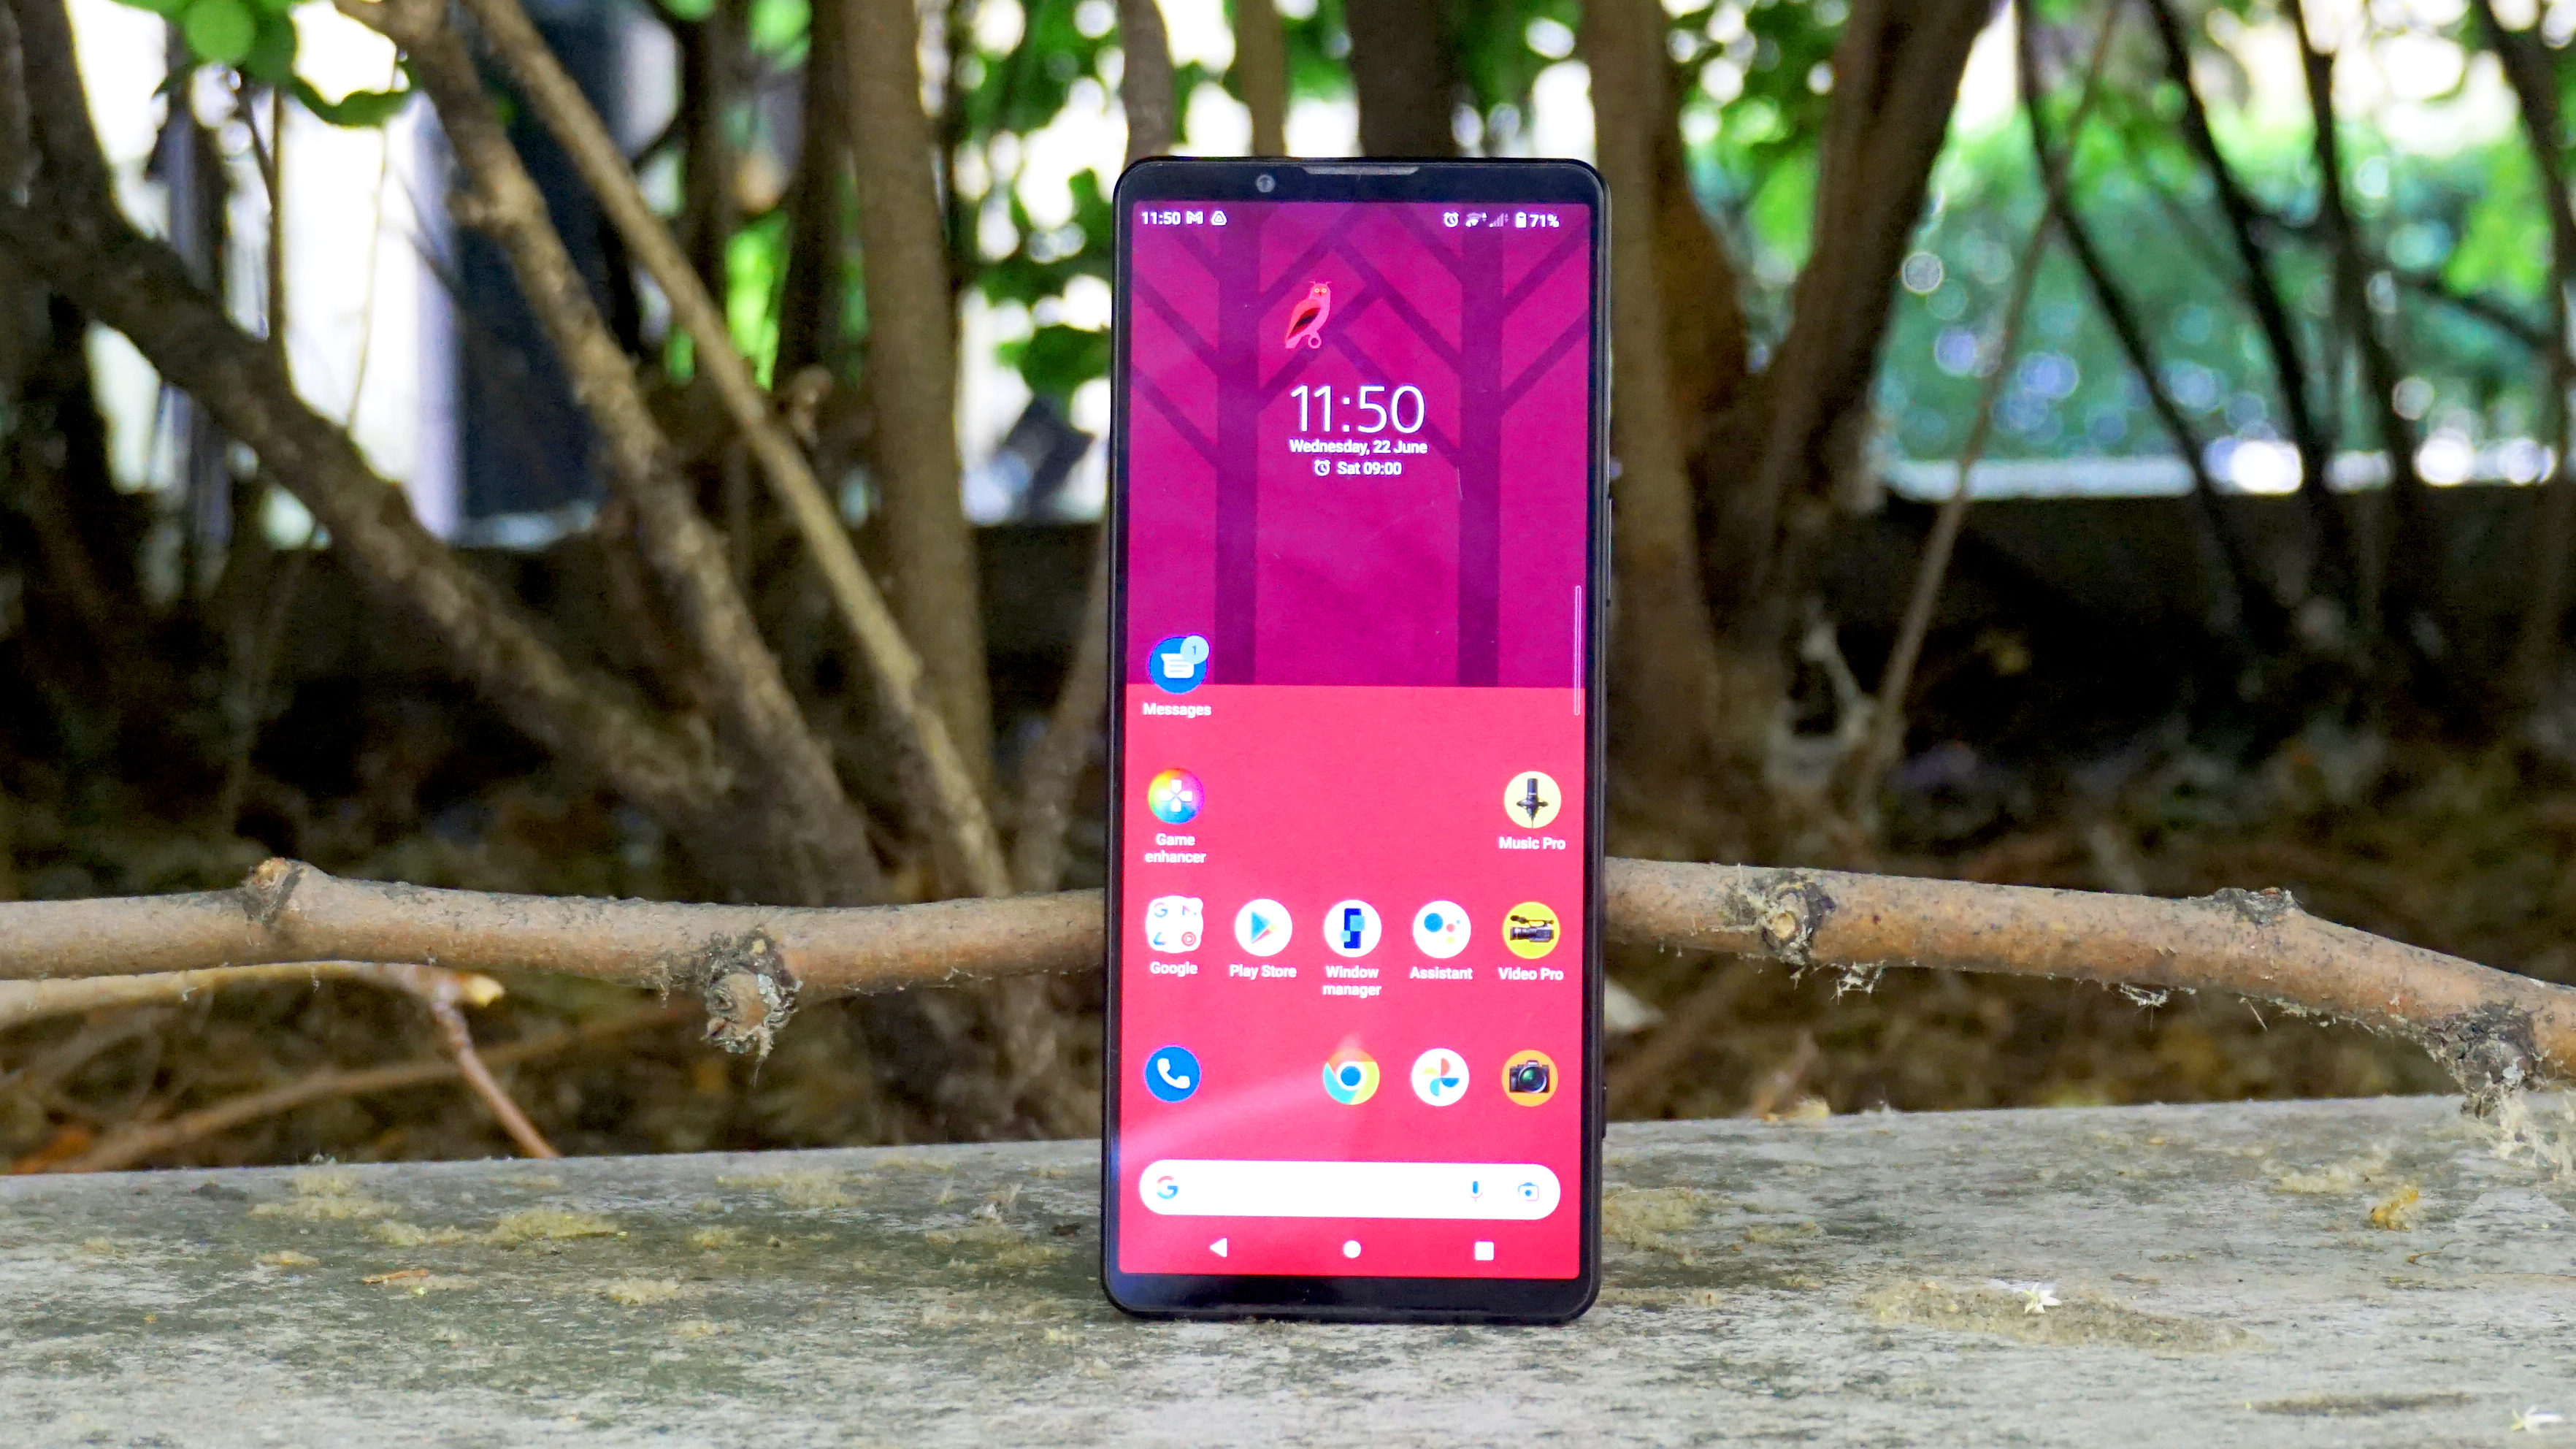 Sony Xperia 1 IV from the front, outside with trees in the background